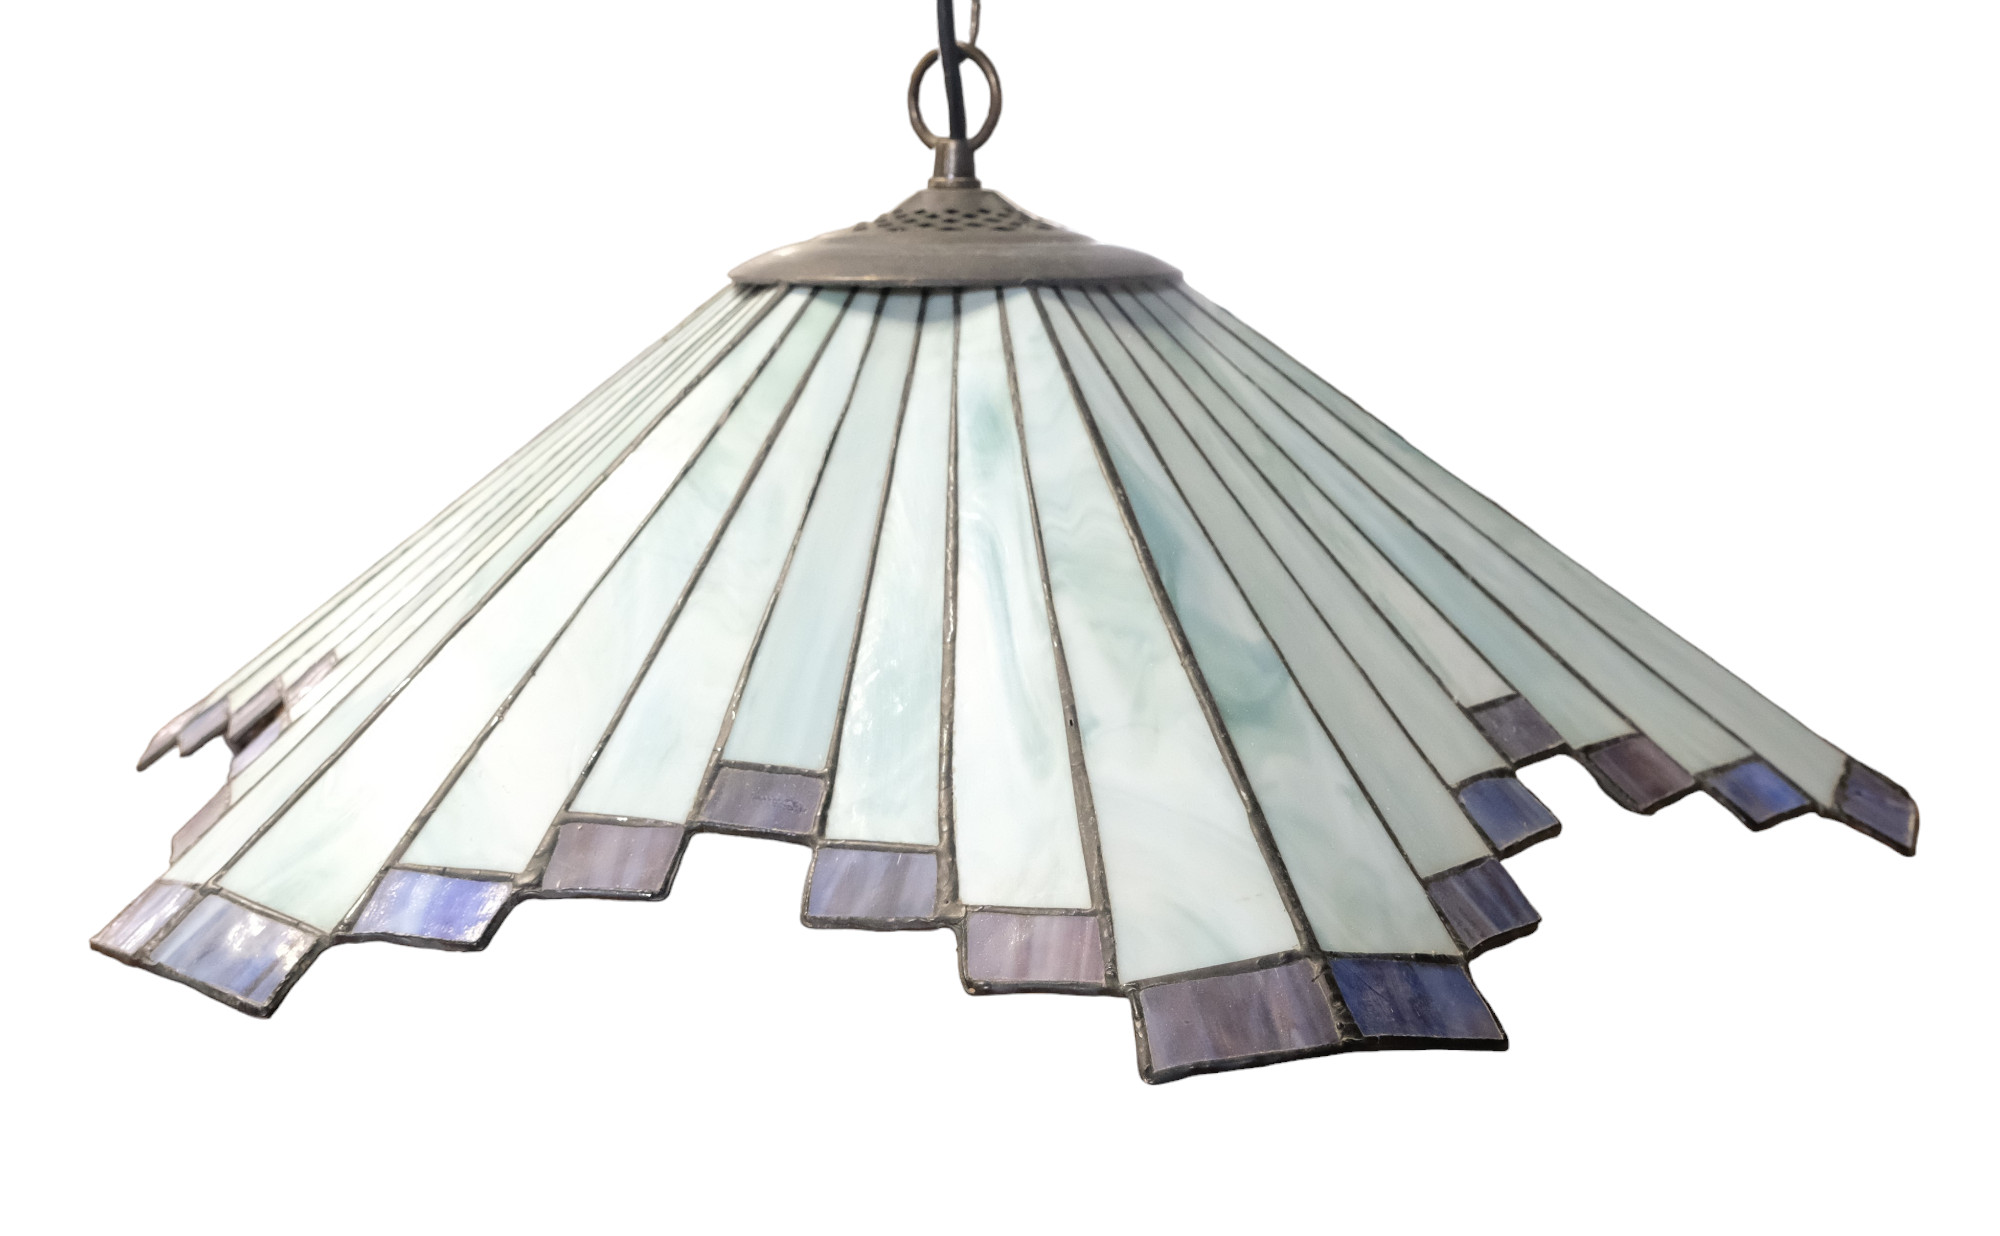 A pair of Tiffany-style lead glass pendant light fittings, 55.5 cm diameter - Image 3 of 3